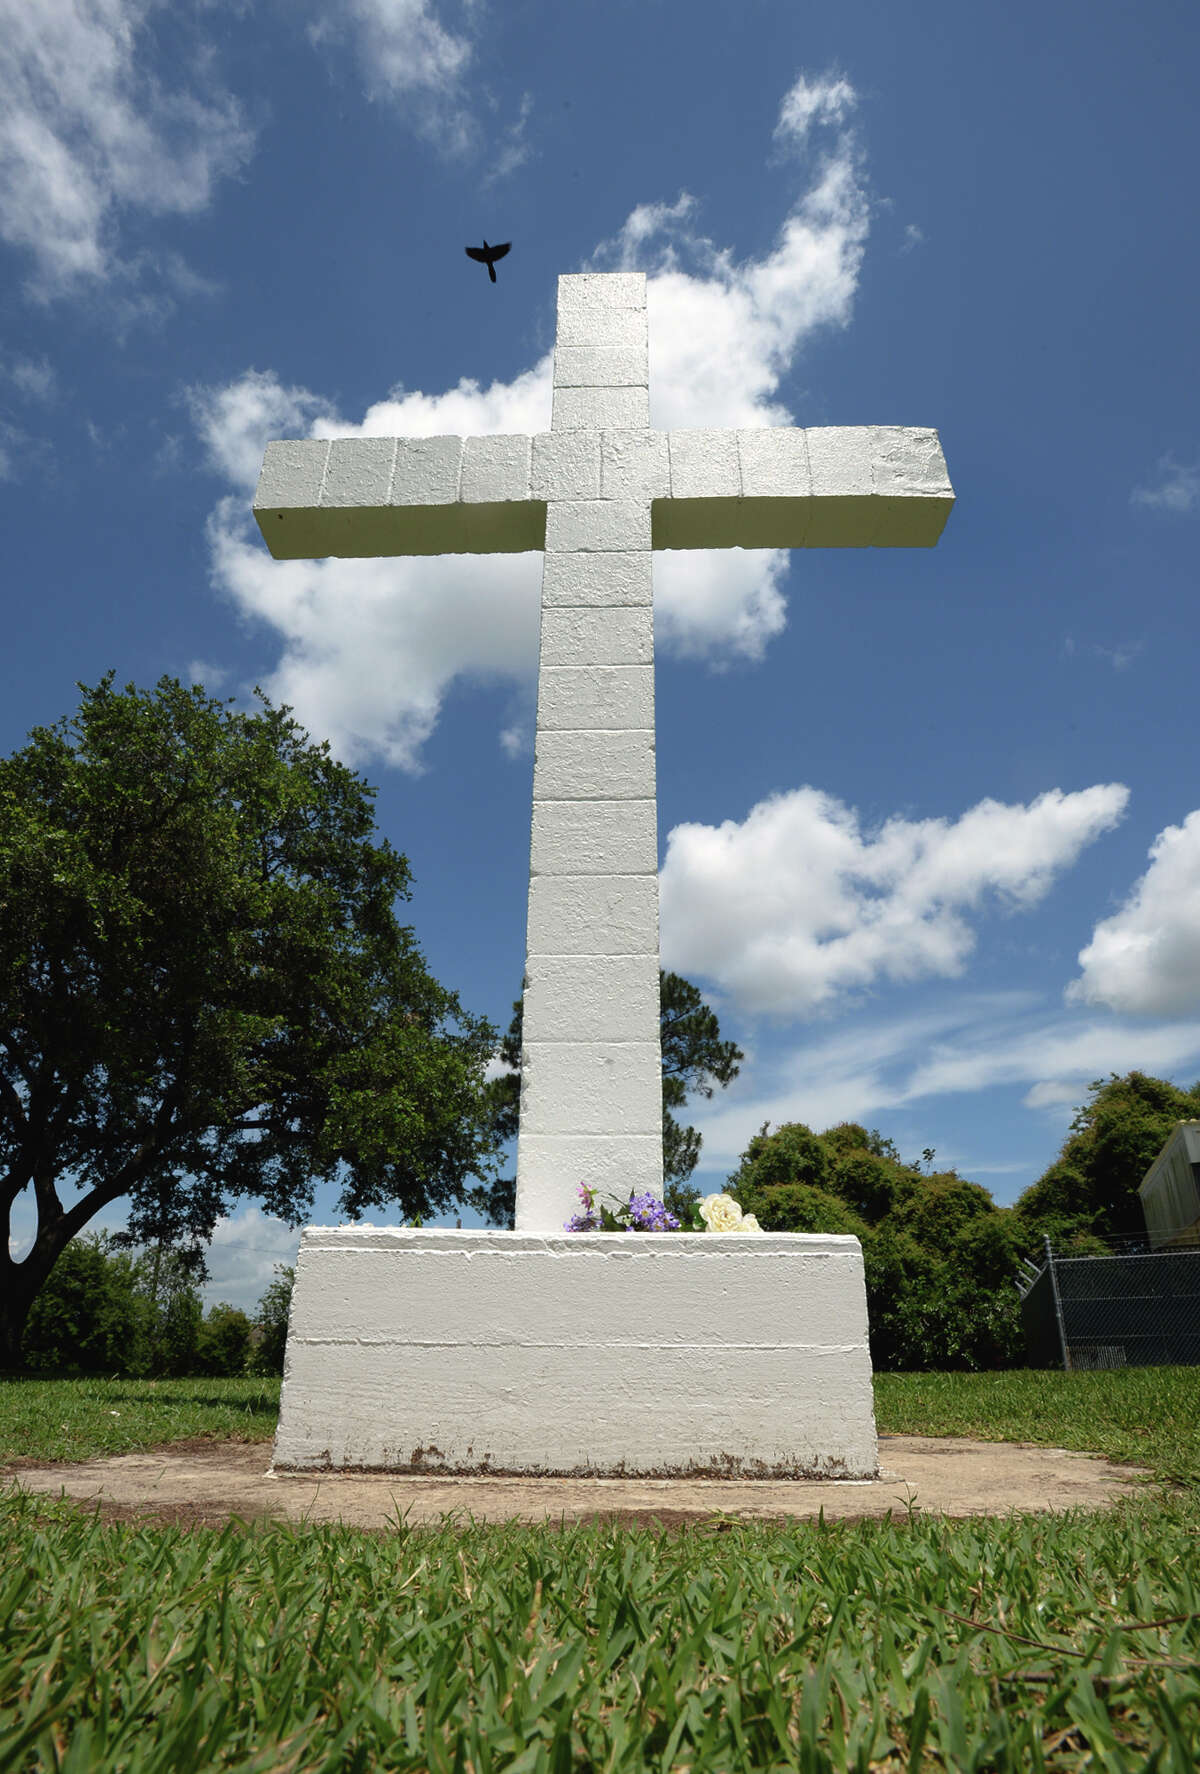 Citing that the public should have a clearer distinction of city property and church property, the Freedom From Religion Foundation is asking the City of Port Neches to fence around the newly sold section of Port Neches park containing a statue of a cross. The cross has been a topic of debate since November when the organization requested its removal on grounds of separation of church and state. Photo taken Monday, May 23, 2016 Guiseppe Barranco/The Enterprise